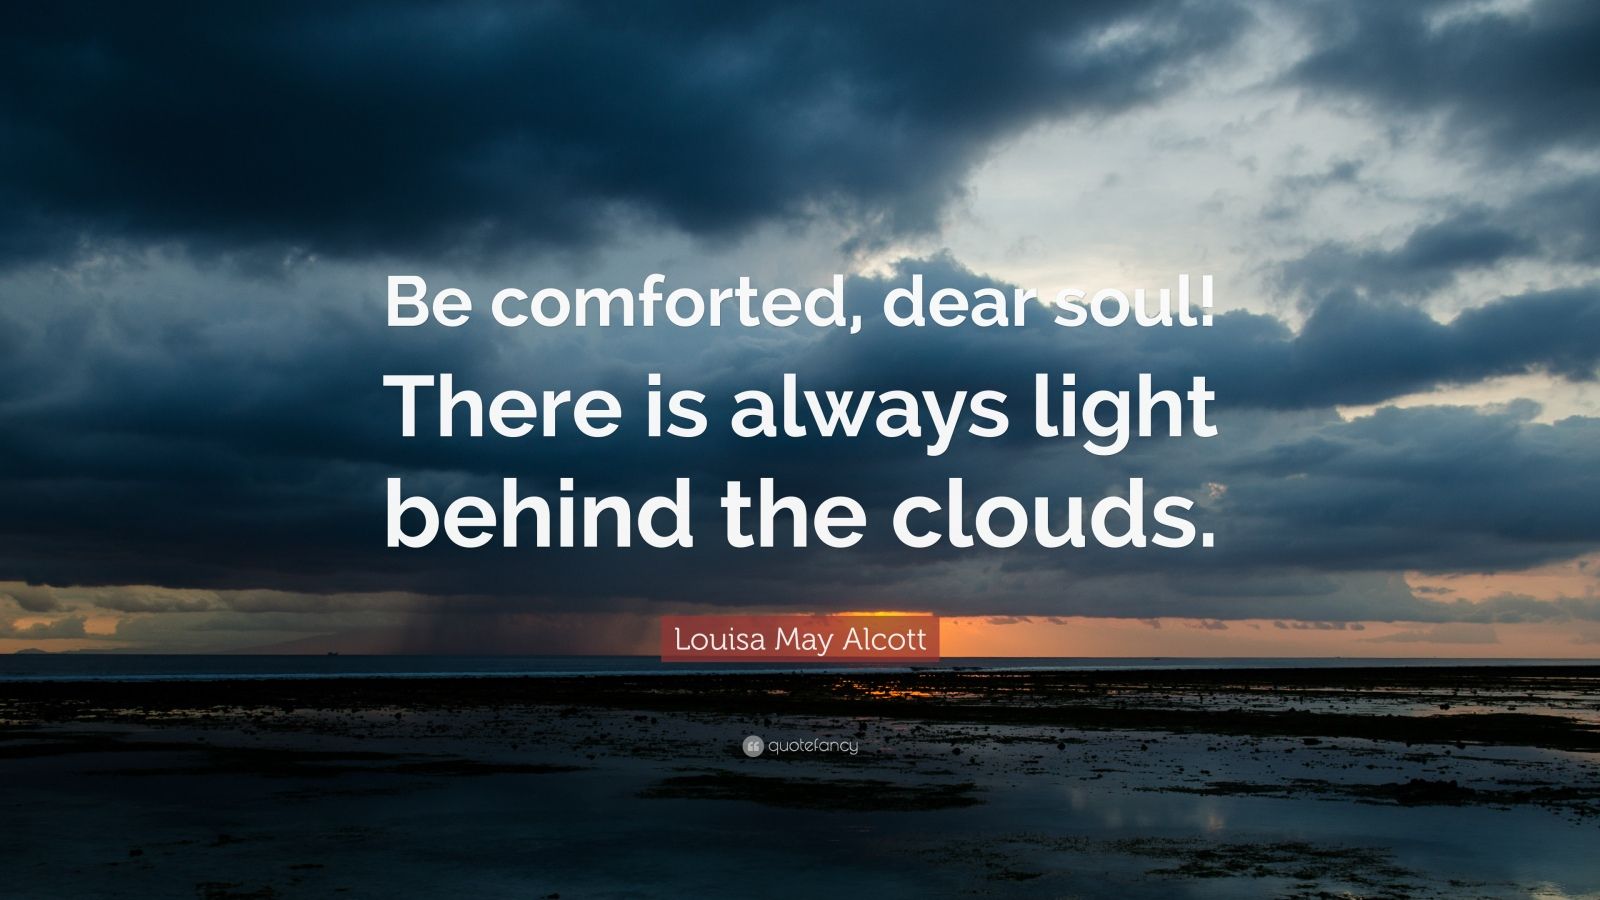 Louisa May Alcott Quote: “Be comforted, dear soul! There is always